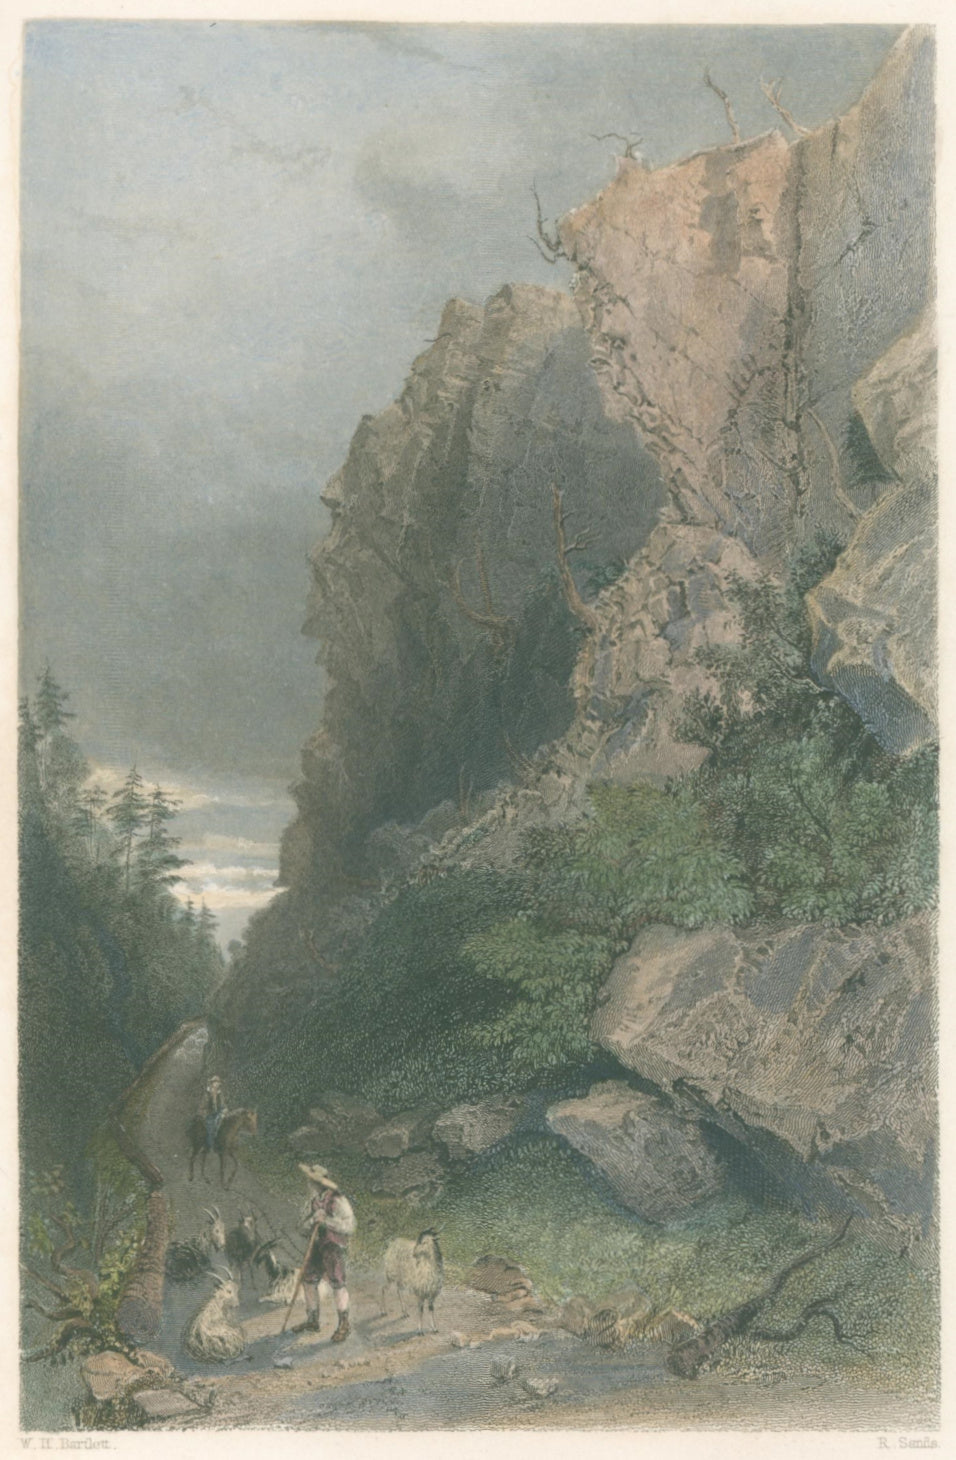 Bartlett, W.H. “Pulpit Rock. (White Mountains)” [NH]